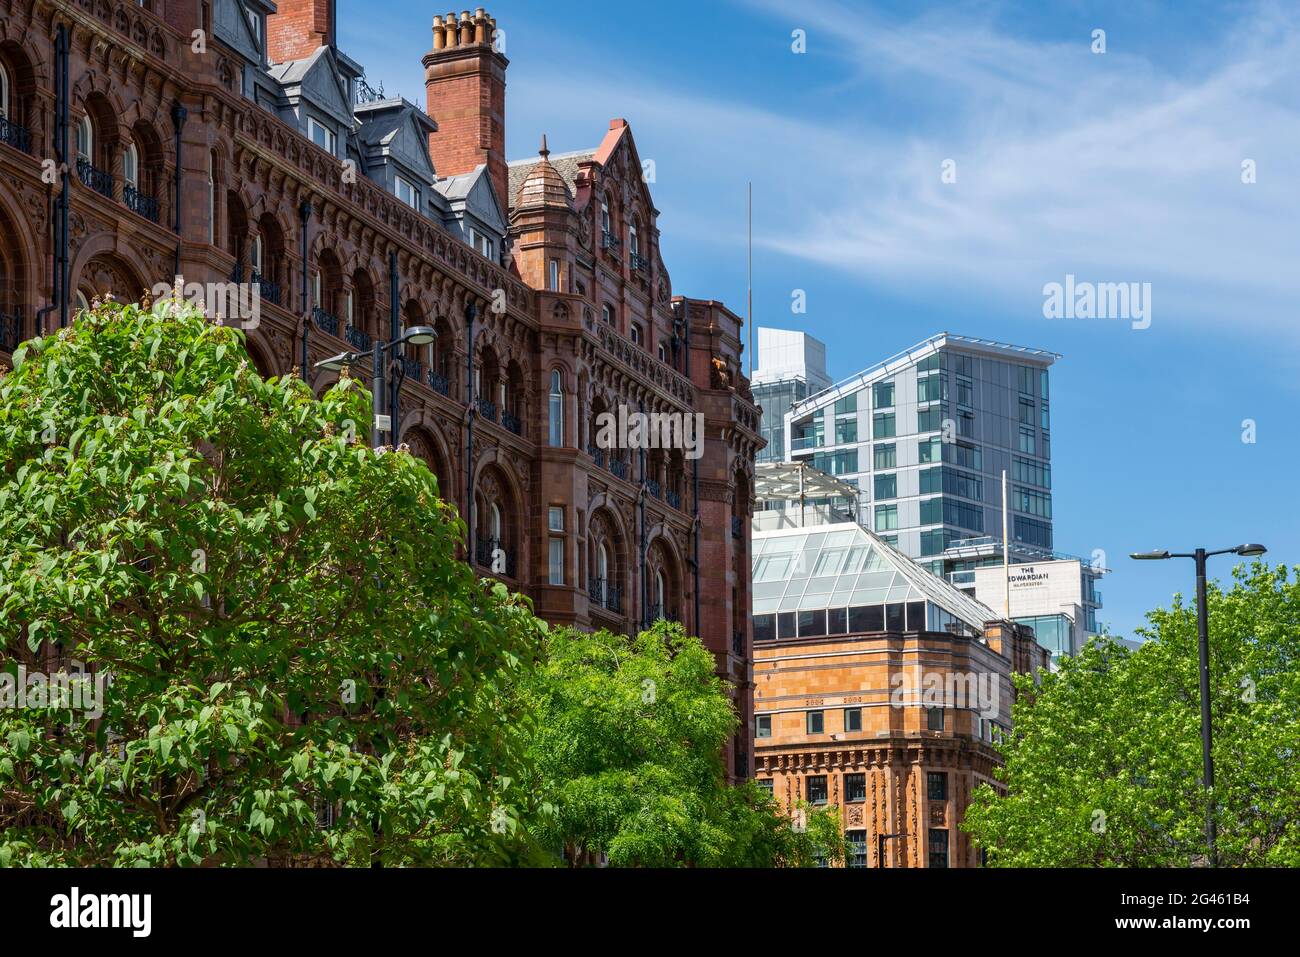 The Midland Hotel and other buildings in the centre of the city of   Manchester, England. Stock Photo